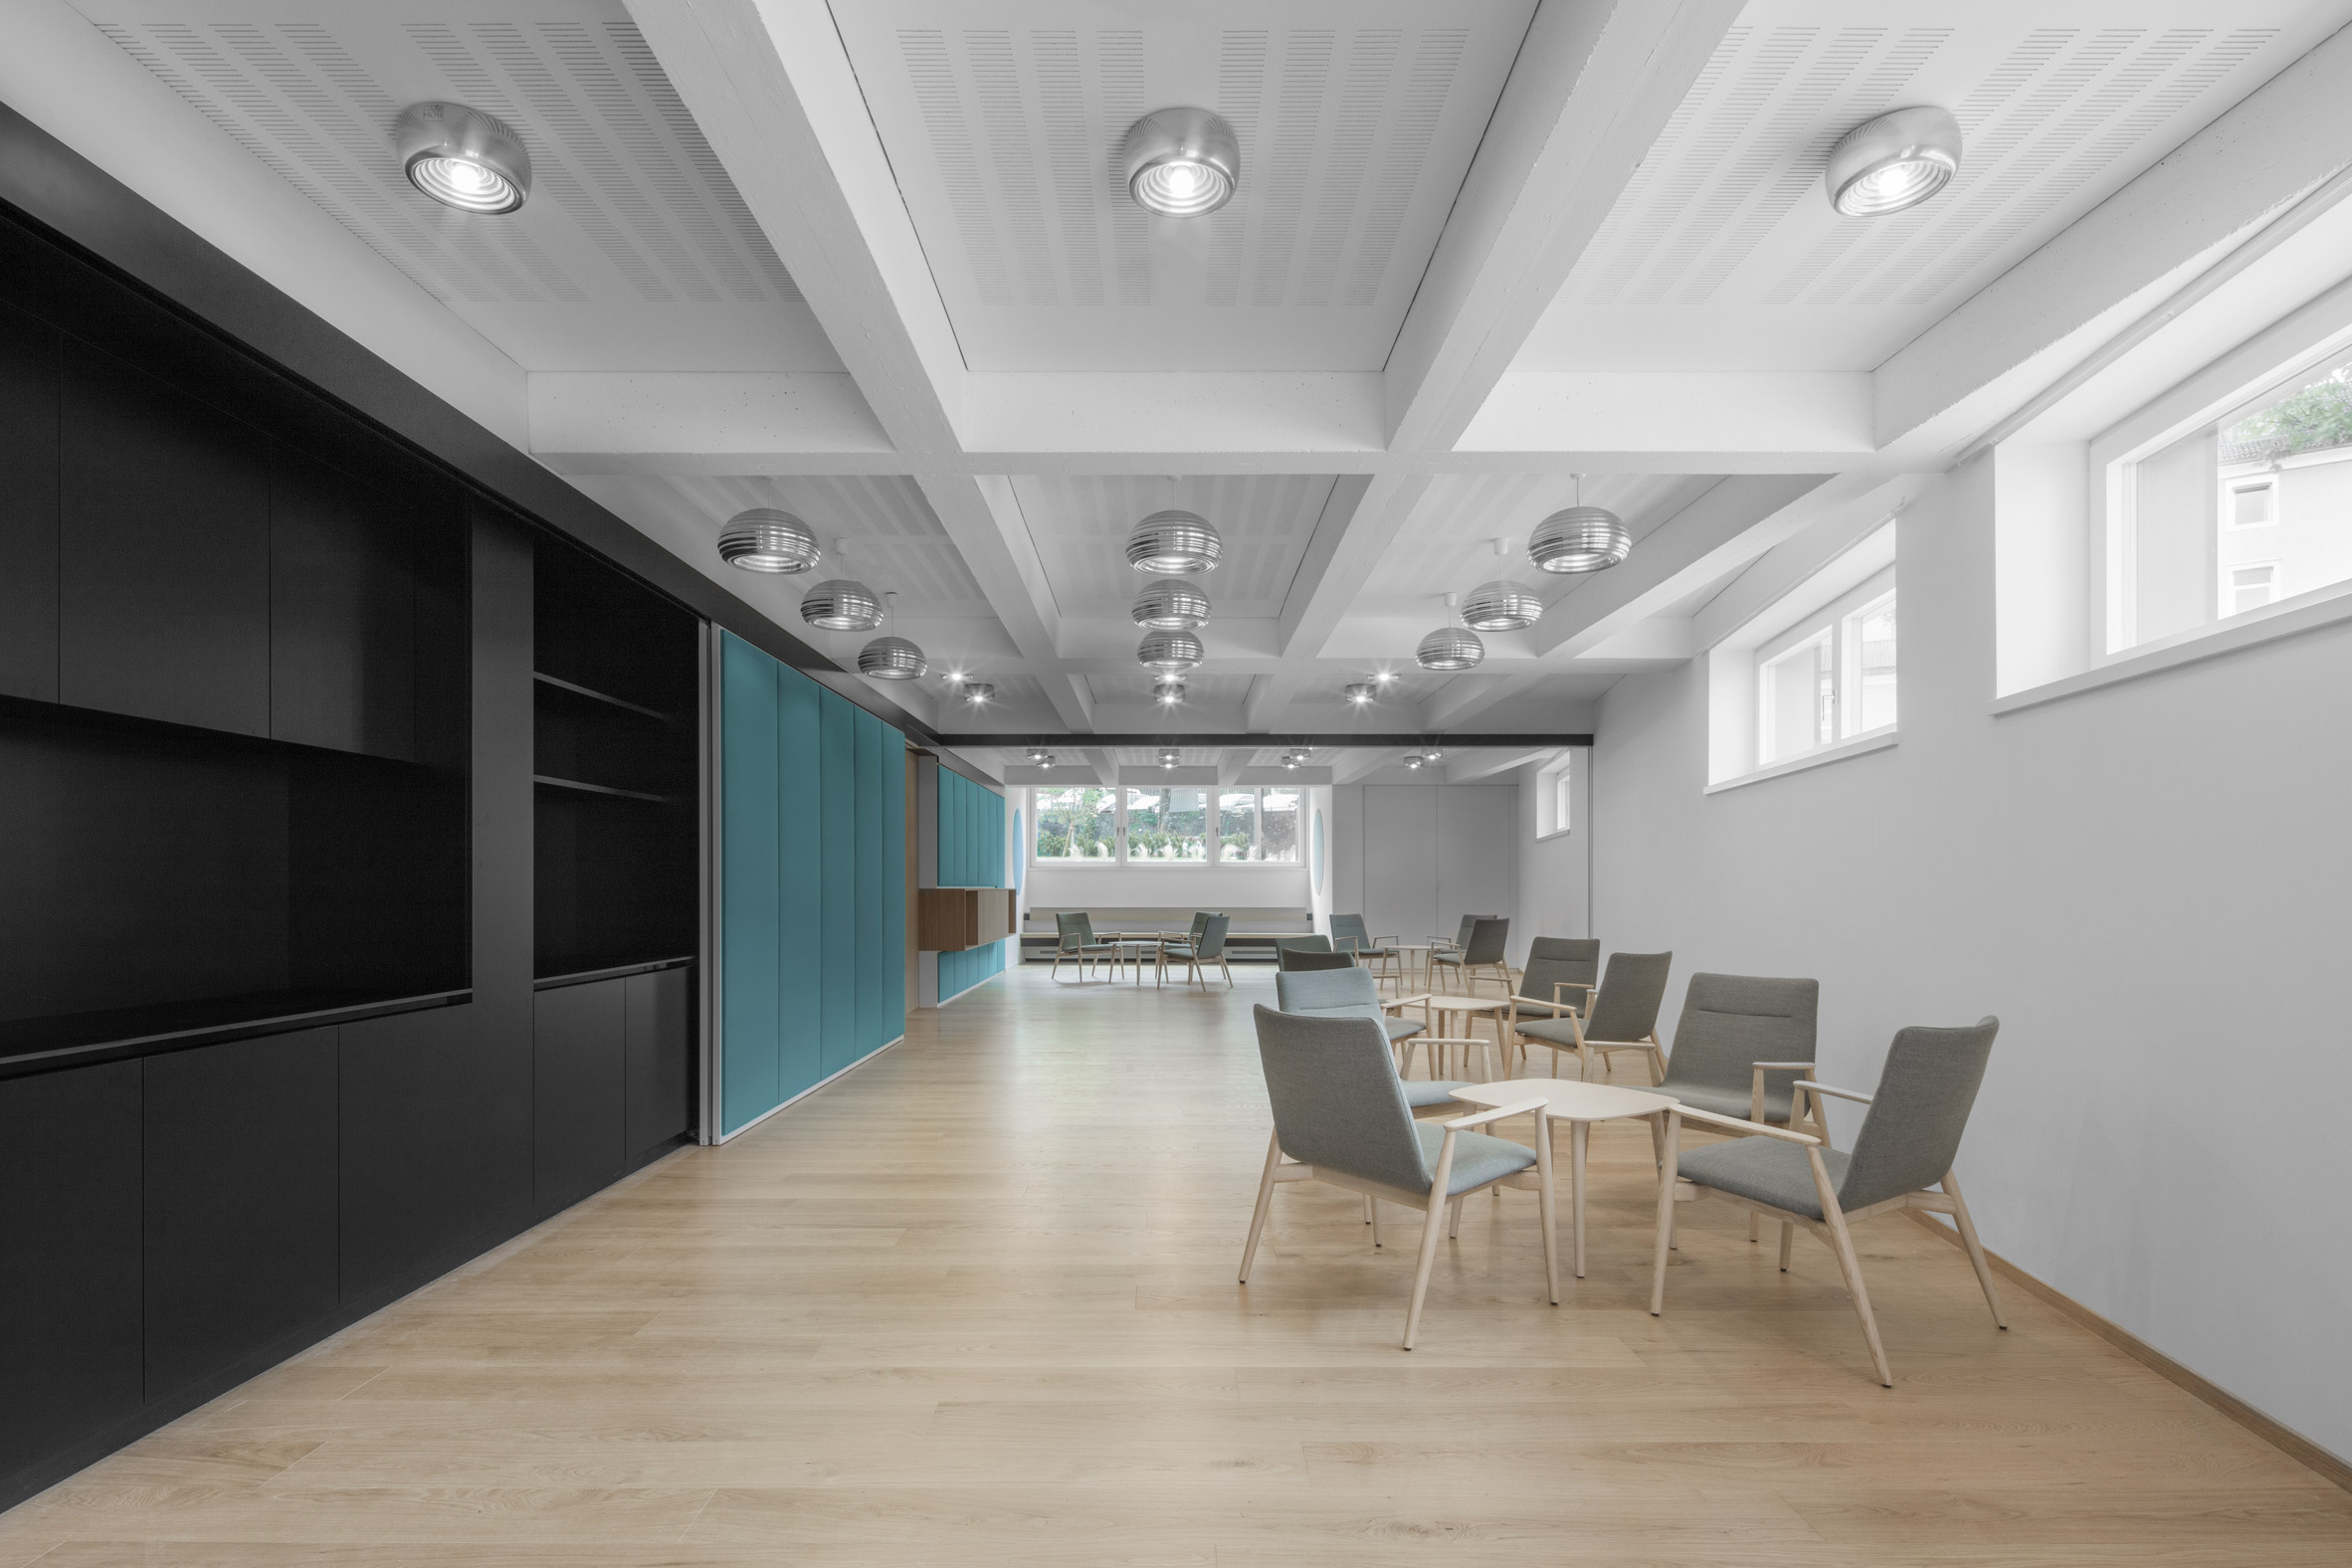 Seminar rooms in Cusanus Academy renovation by MoDus Architects